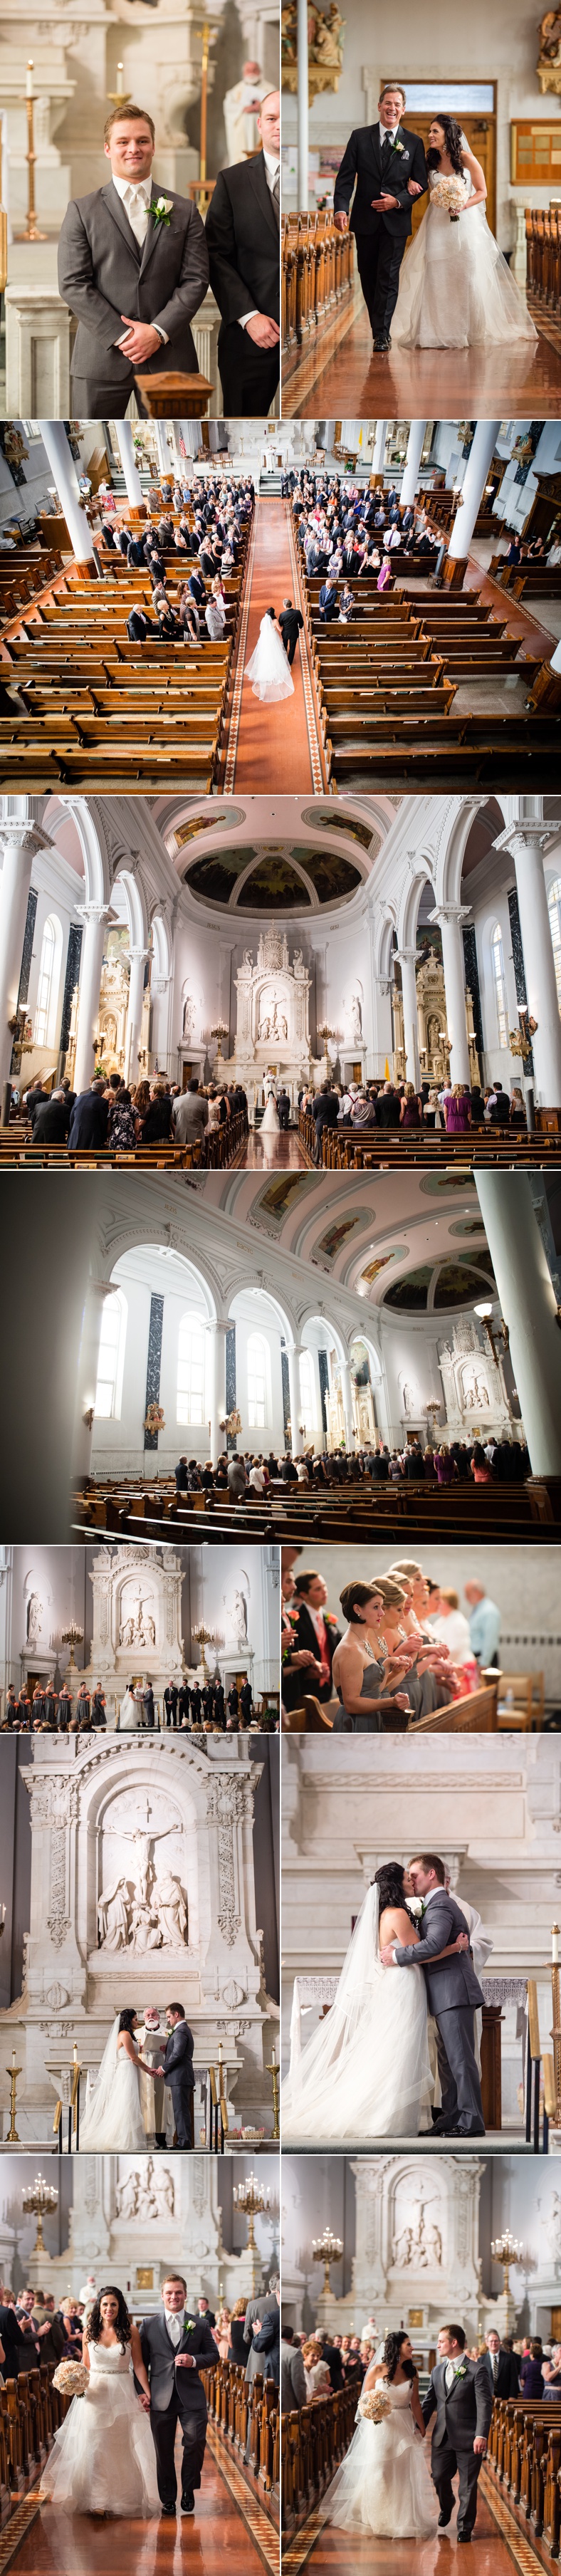 Sts. Peter and Paul Wedding 